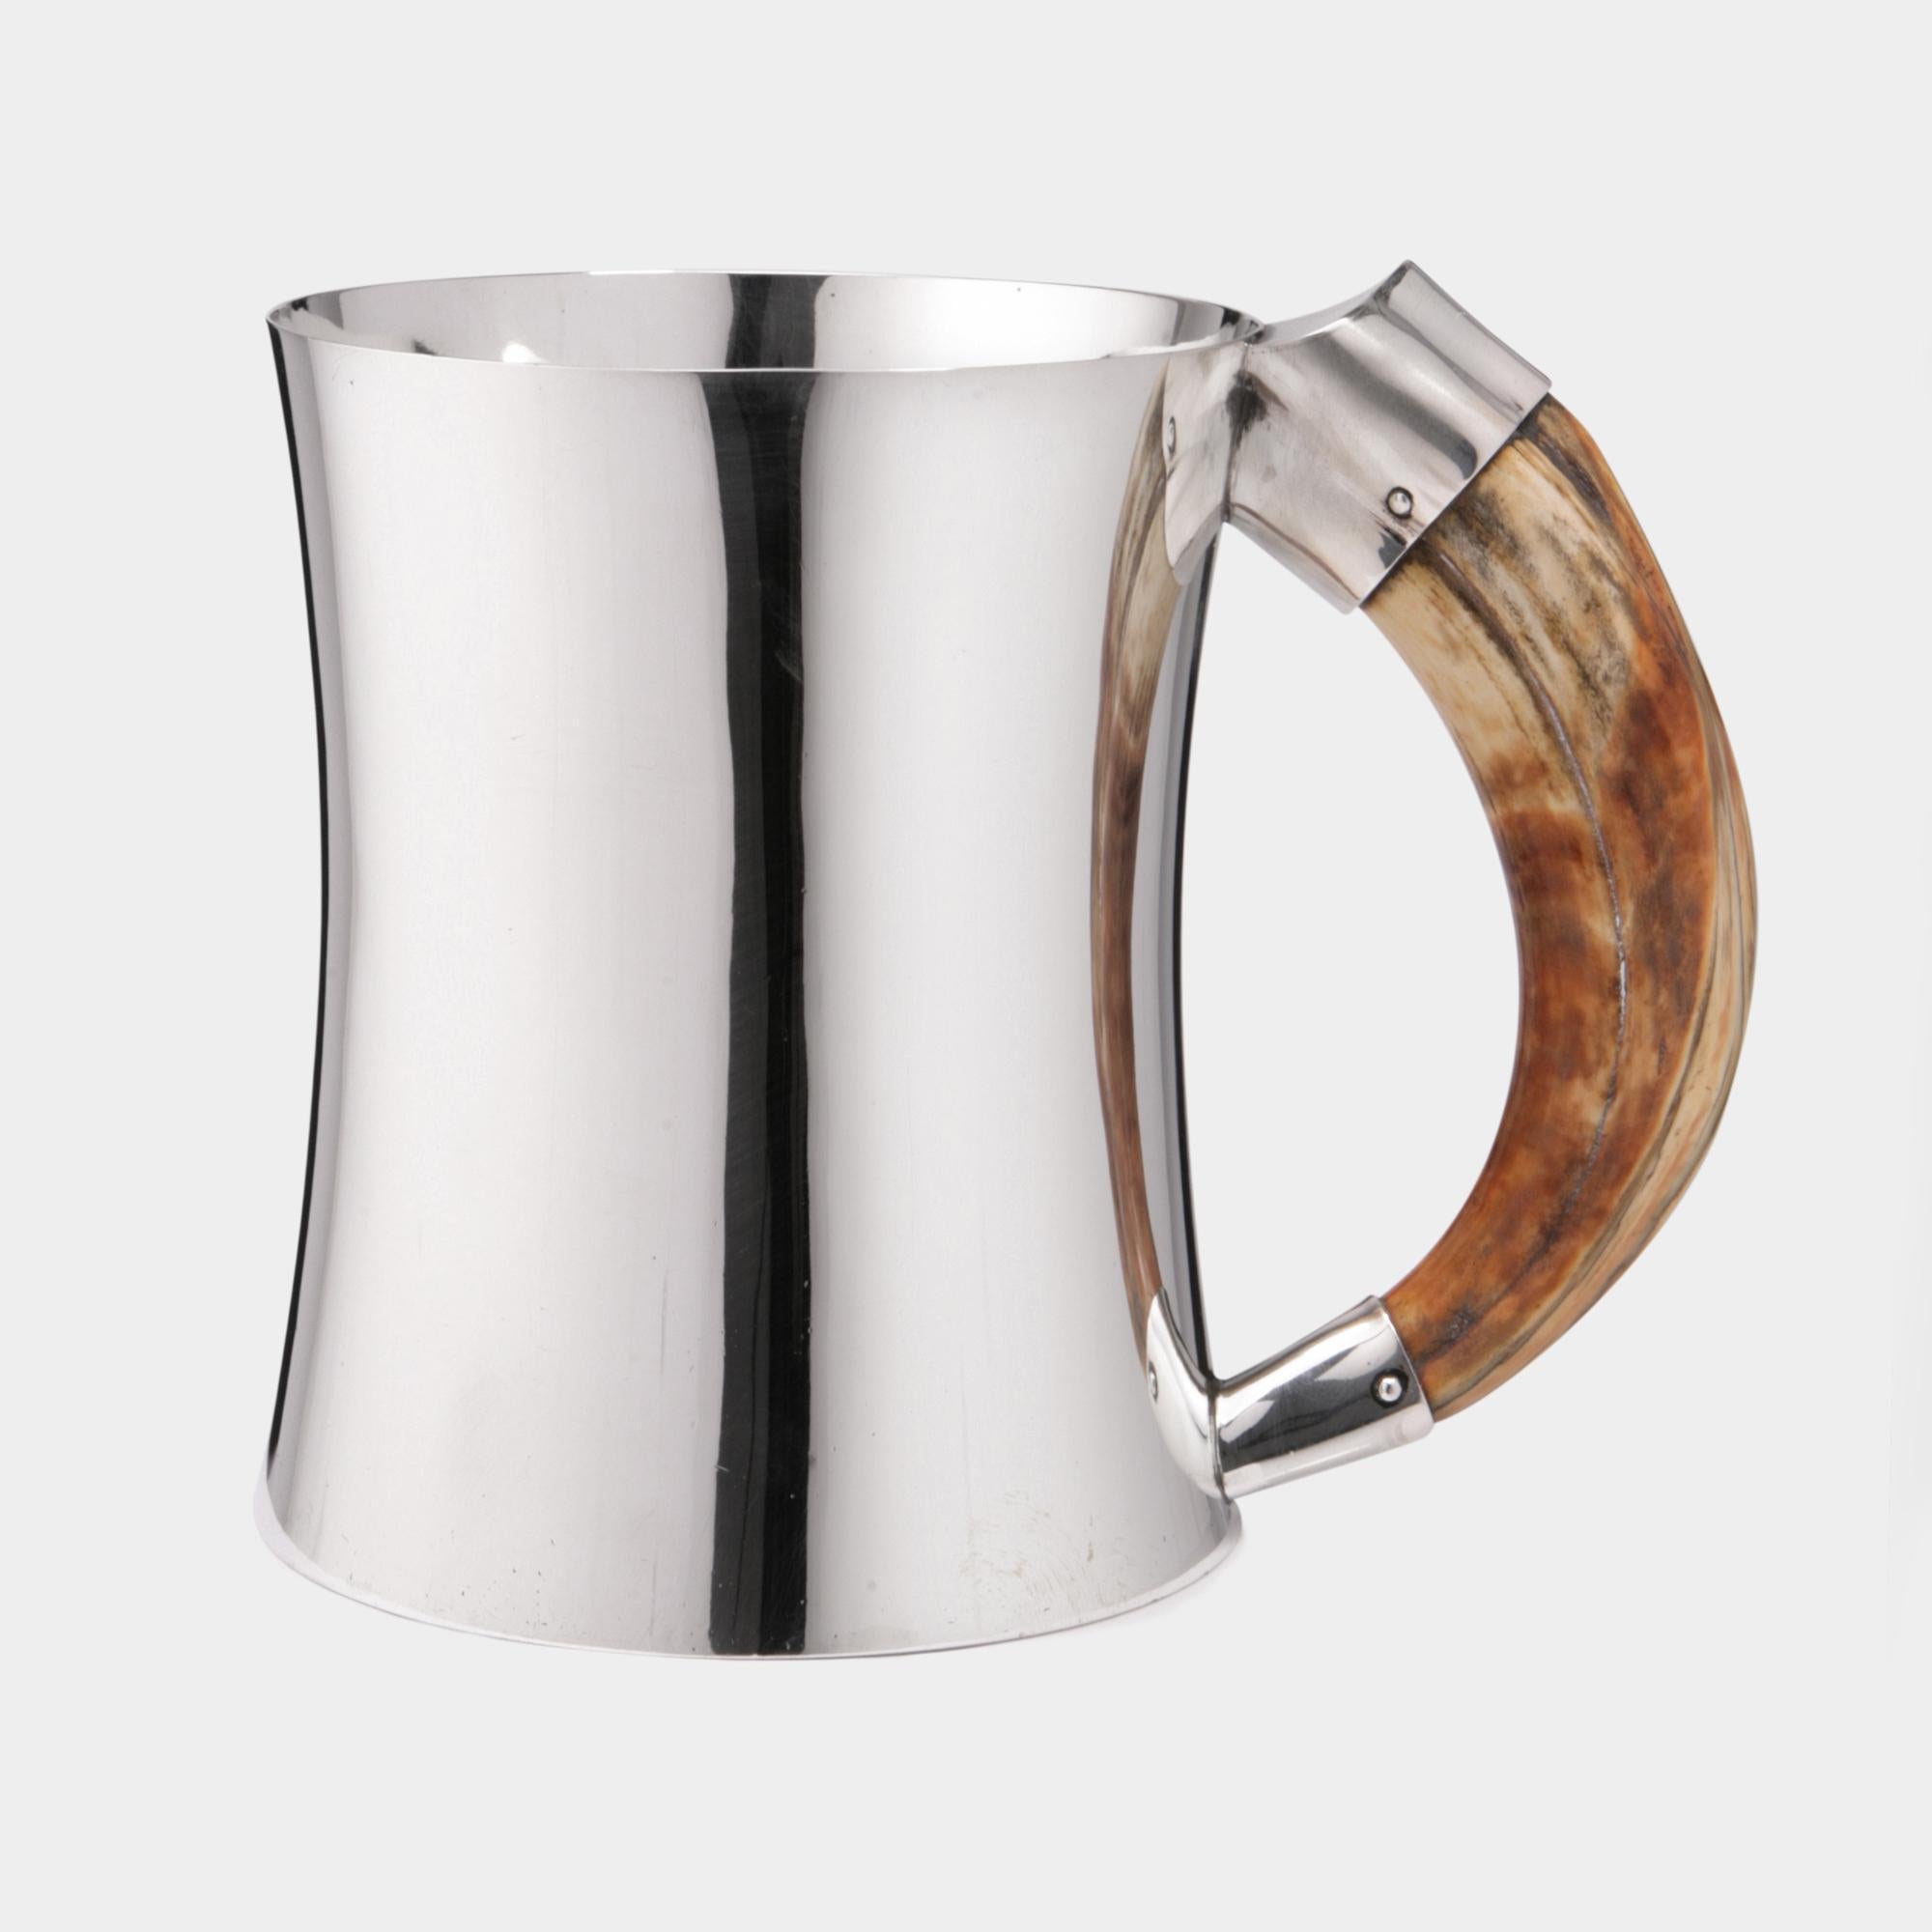 Sterling Silver Large Silver Tankard with Boar's Tusk Handle